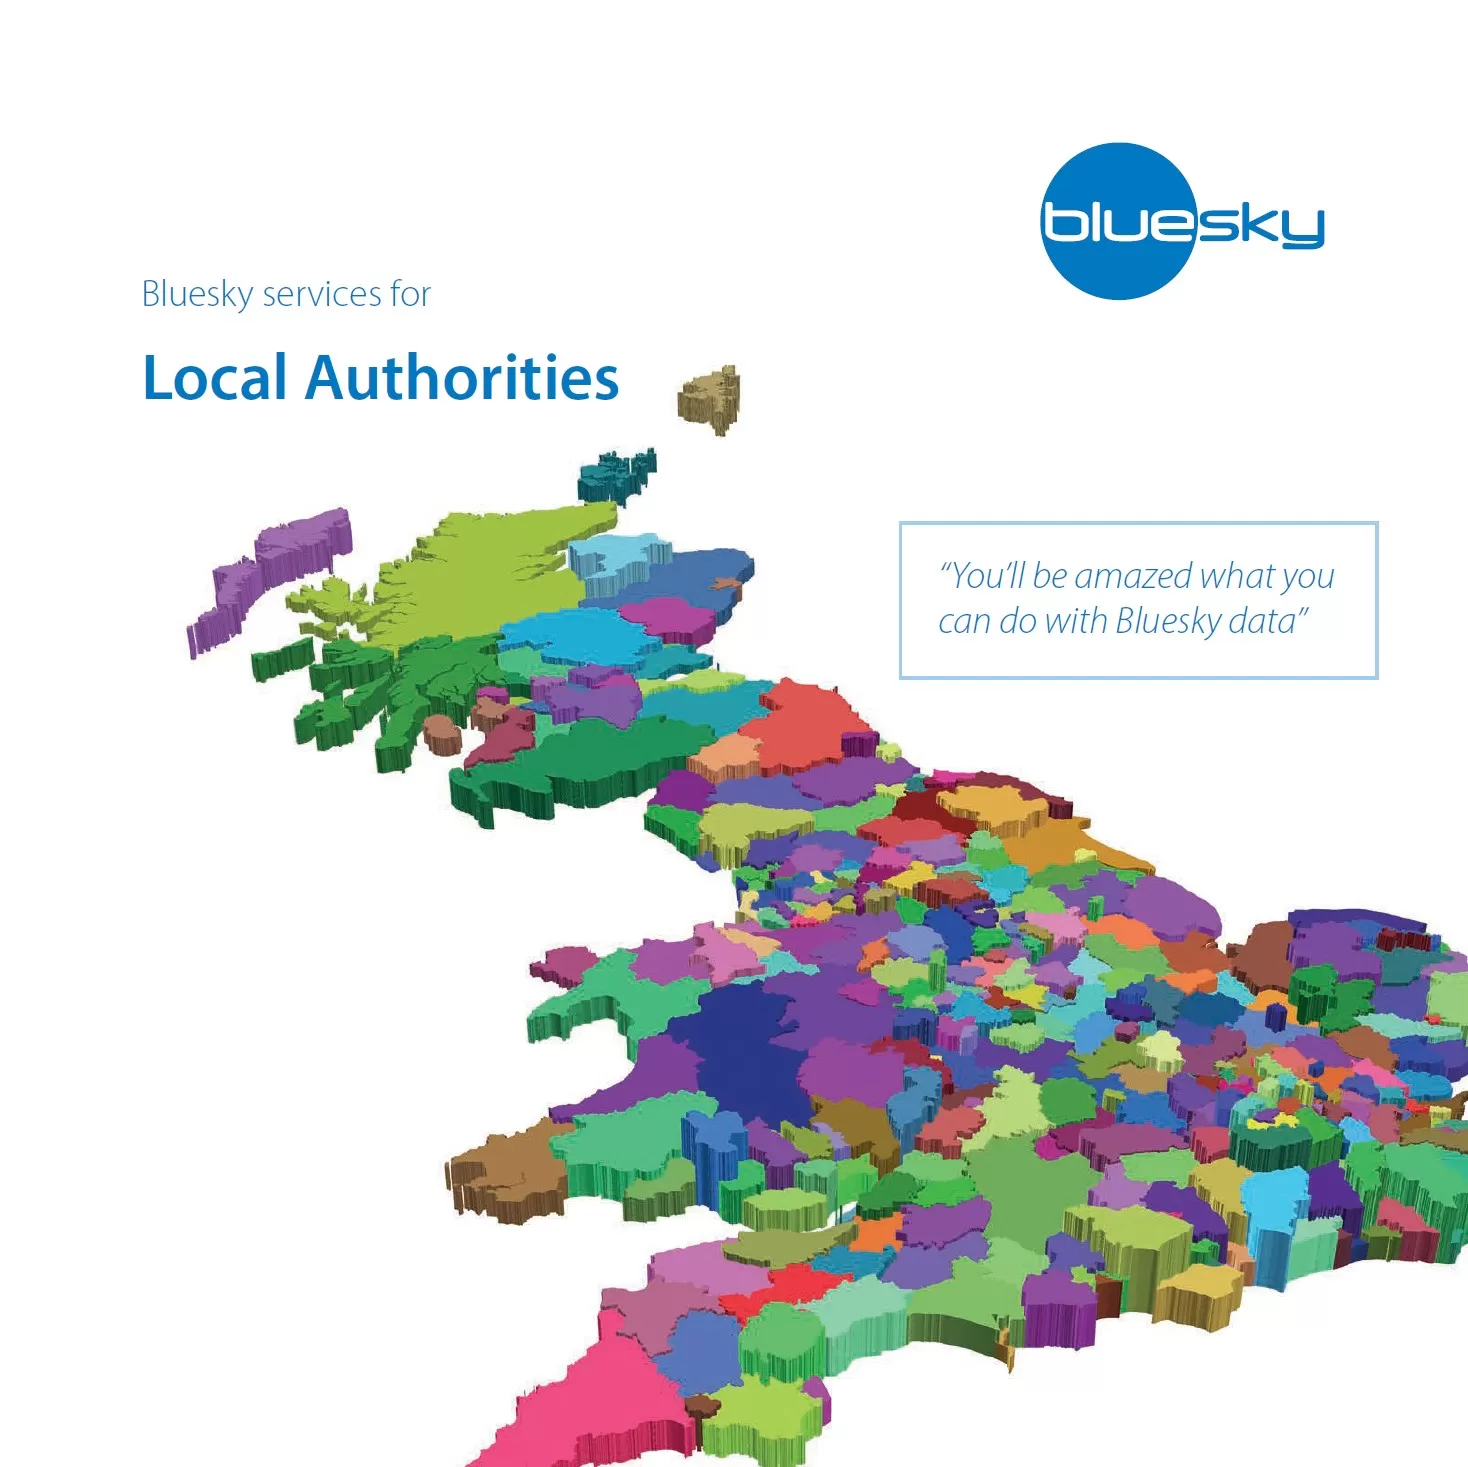 Thumbnail image of Bluesky's Local Authorities Brochure